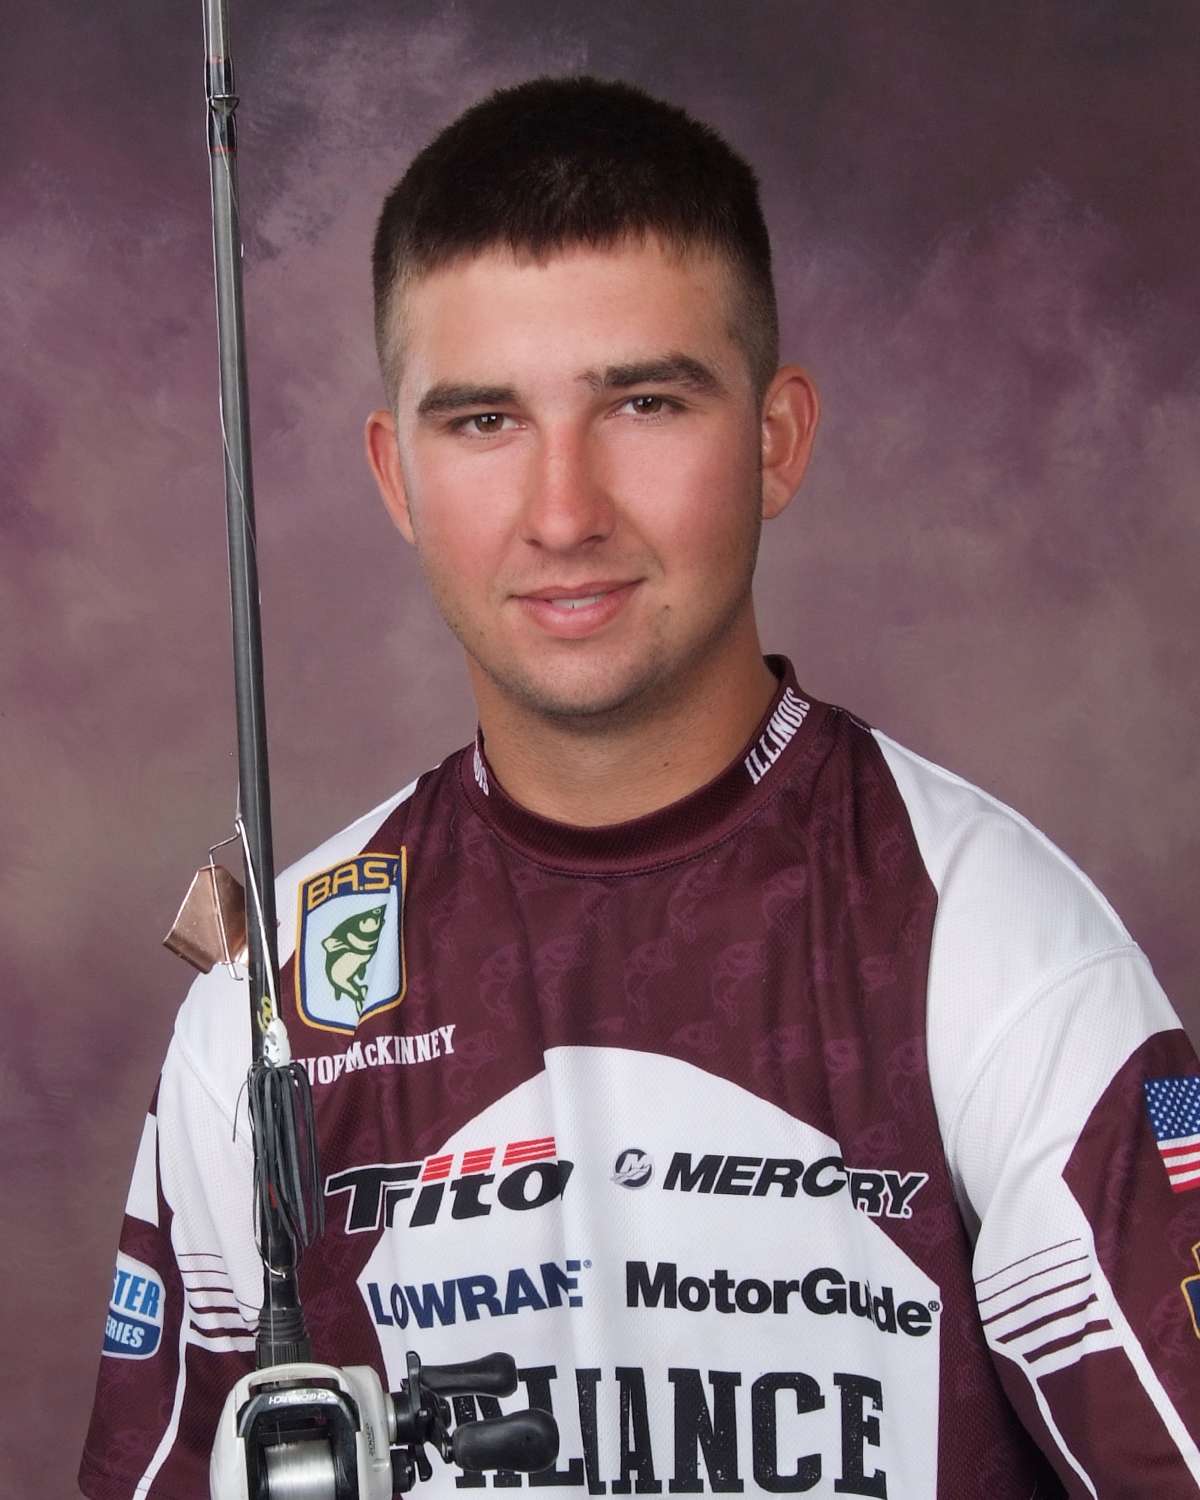 <b>Illinois: Trevor McKinney</b><br>
McKinney is a member of the Benton Bass Fishing team in Benton, Ill., and has earned five tournament wins and 11 Top 5 finishes in the last year. He will graduate as a Valedictorian of the Benton High School Class of 2016.
